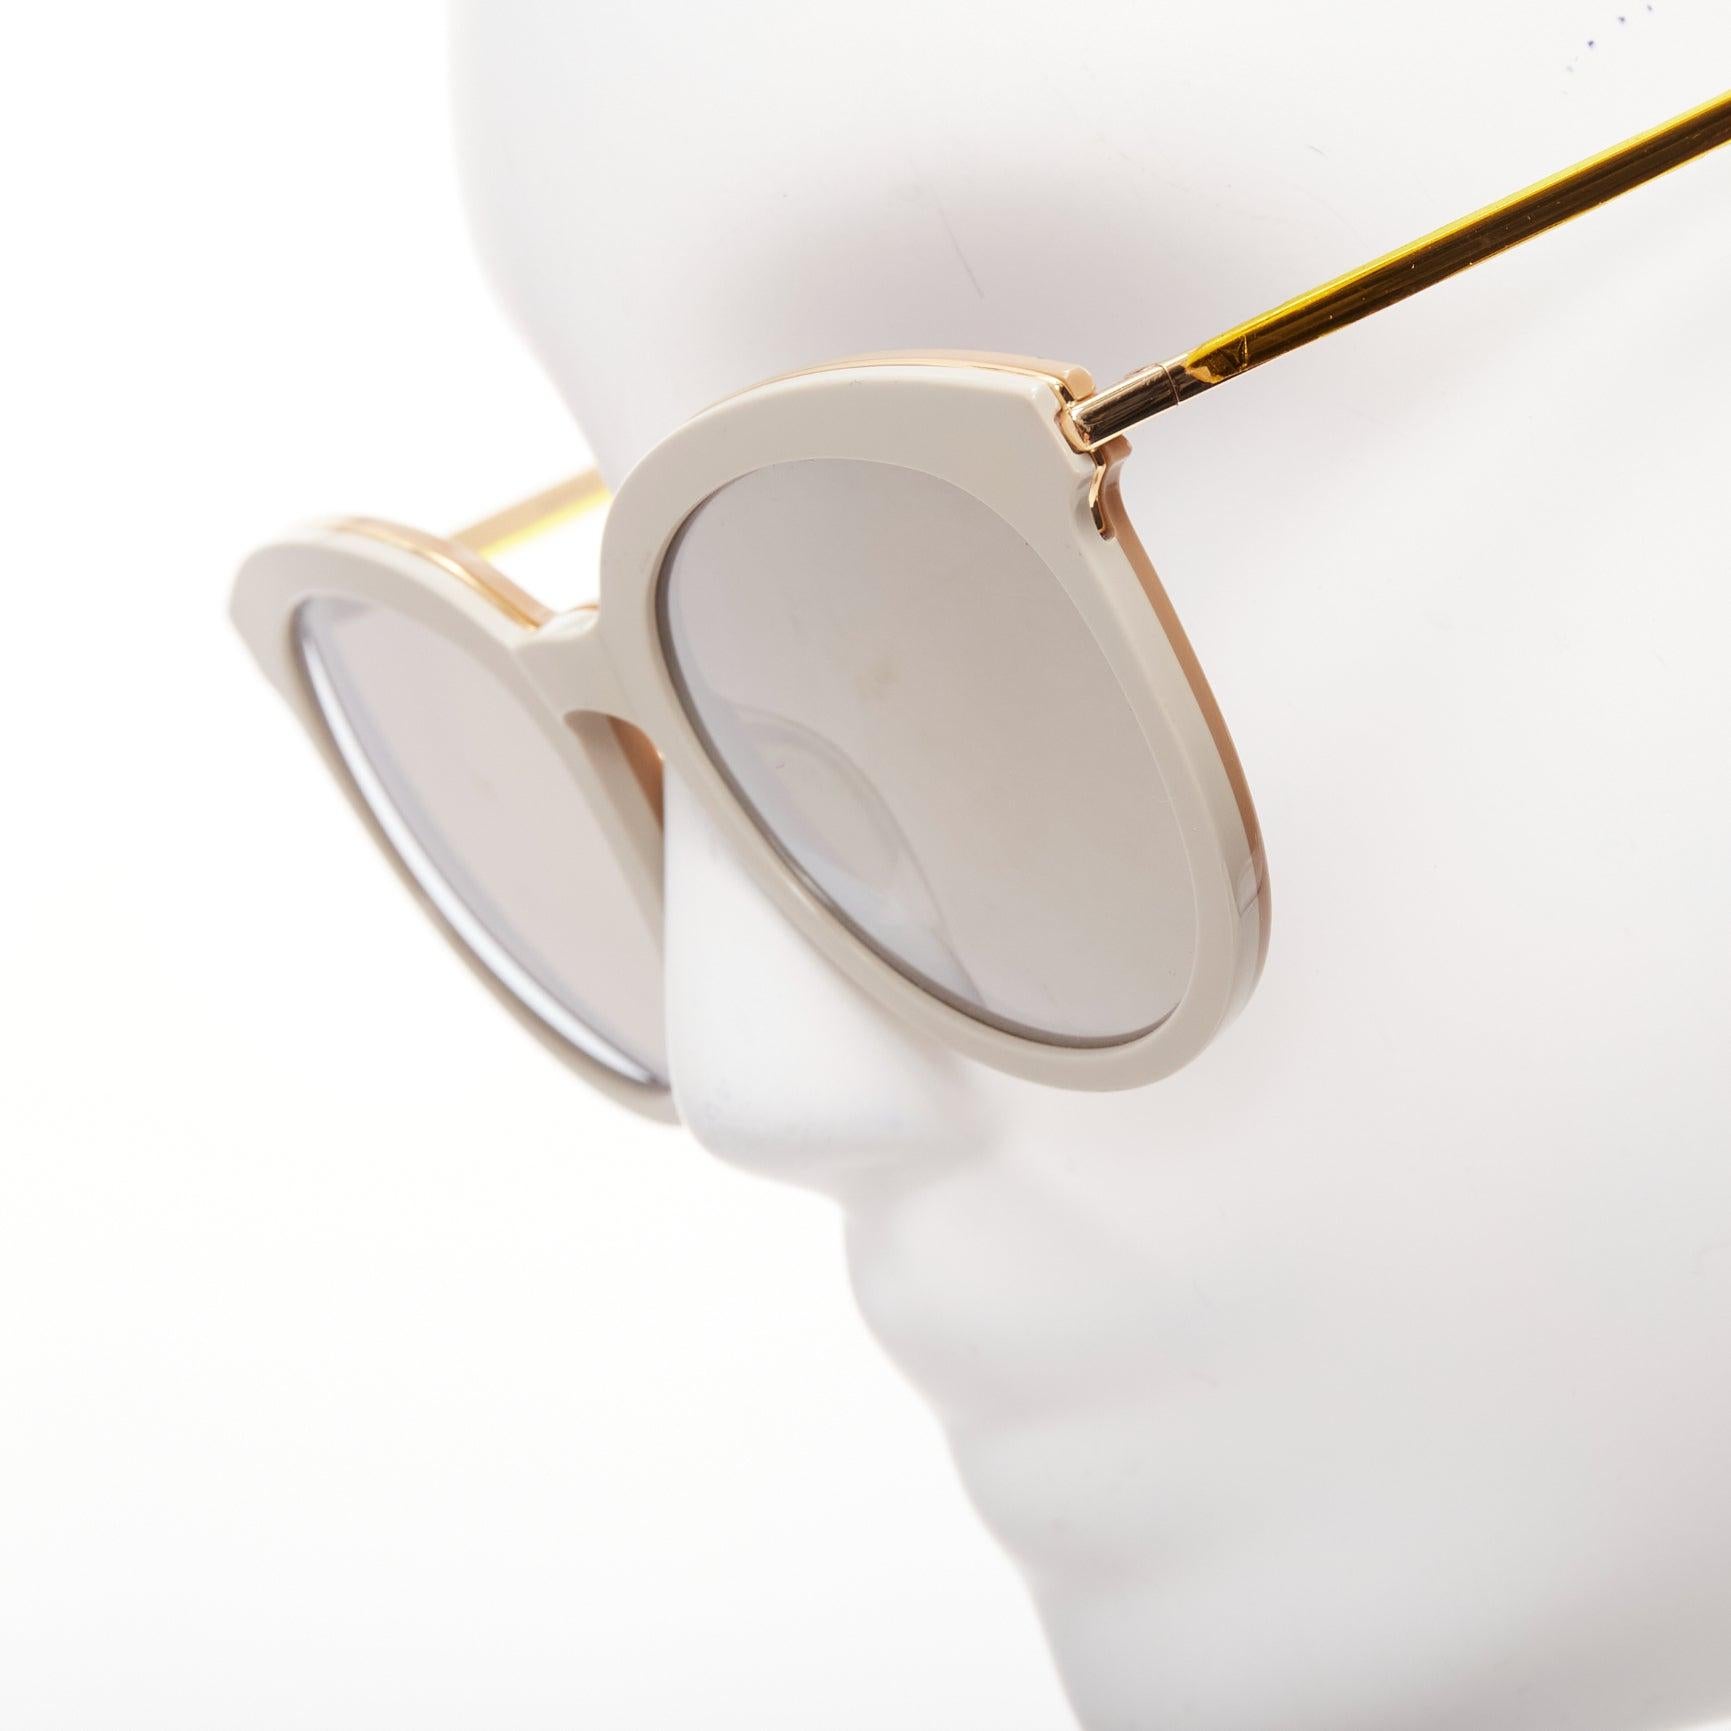 GENTLE MONSTER Vanilla Road beige acetate gold arm reflective sunglasses
Reference: AAWC/A01017
Brand: Gentle Monster
Model: Vanilla Road
Material: Acetate, Metal
Color: Beige, Gold
Pattern: Solid
Lining: Gold Acetate
Extra Details: Logo at